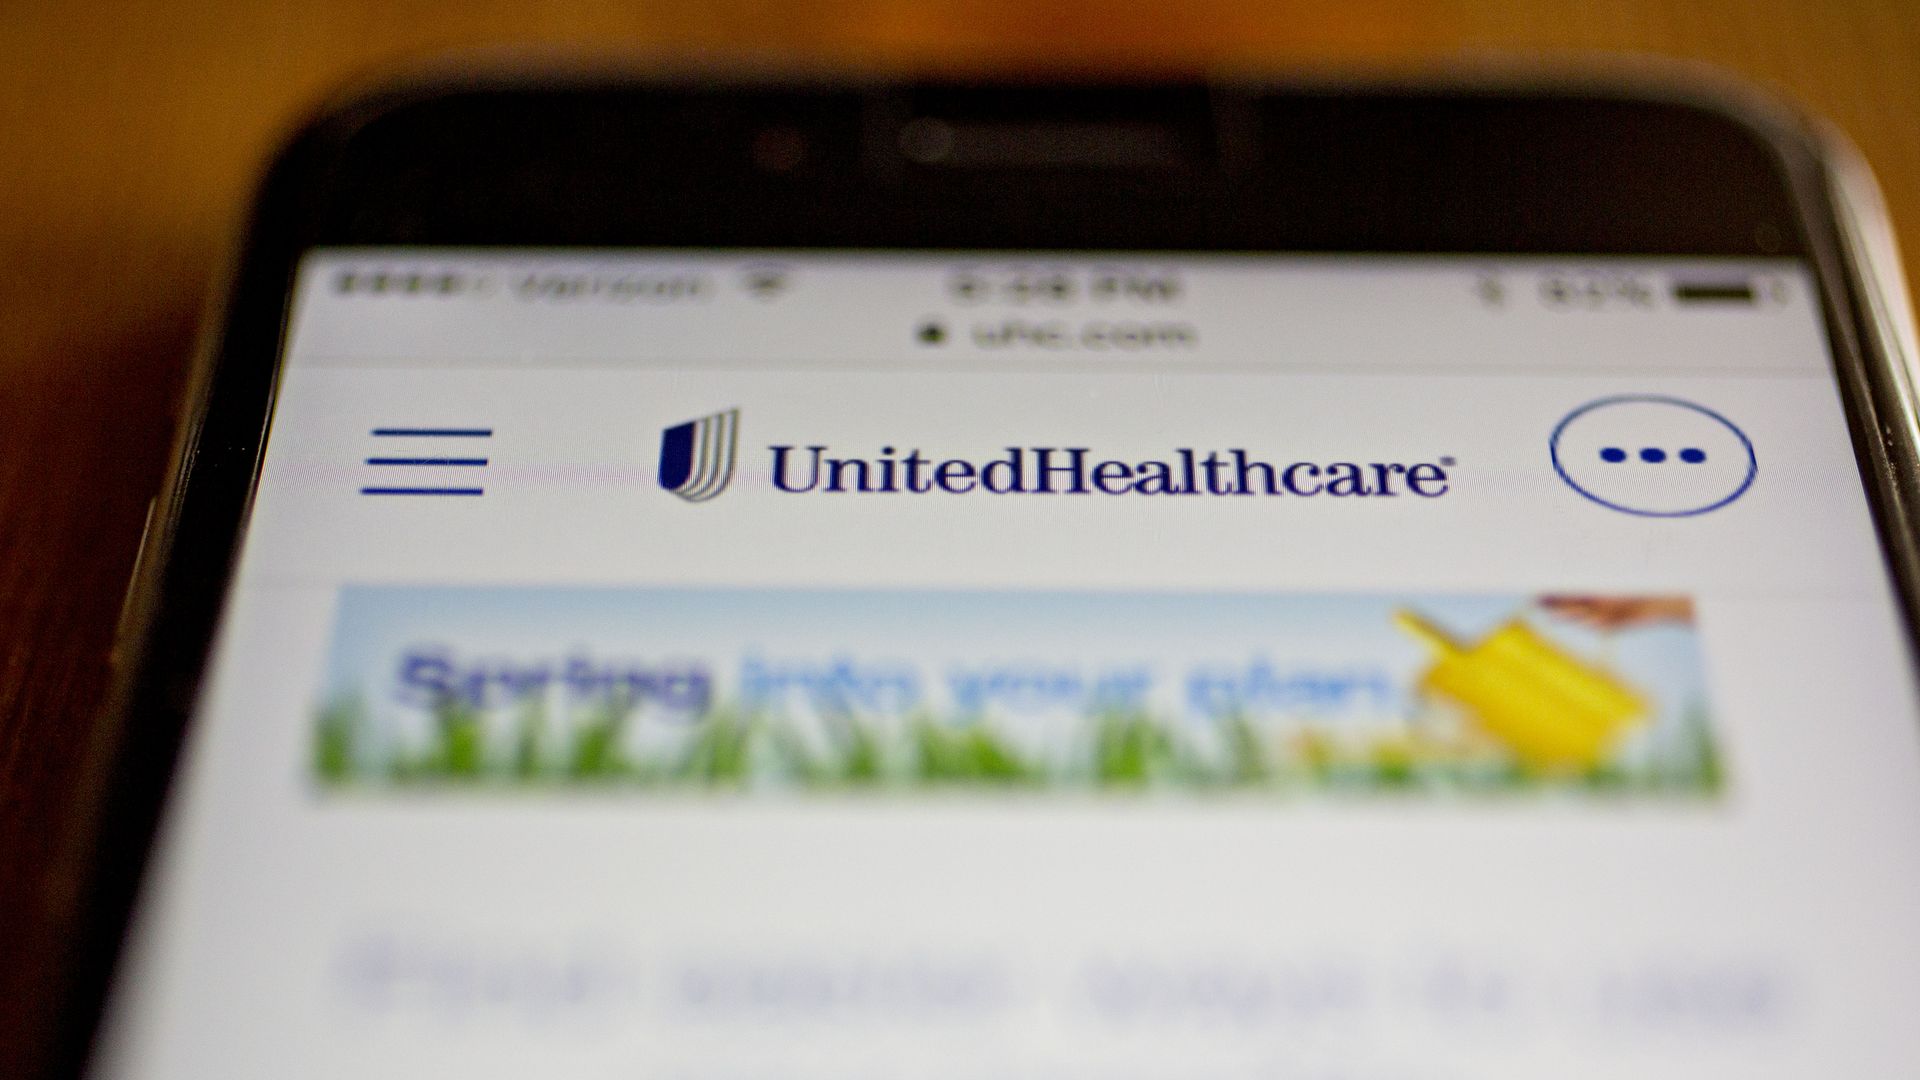 The UnitedHealthcare logo and website on a smartphone.